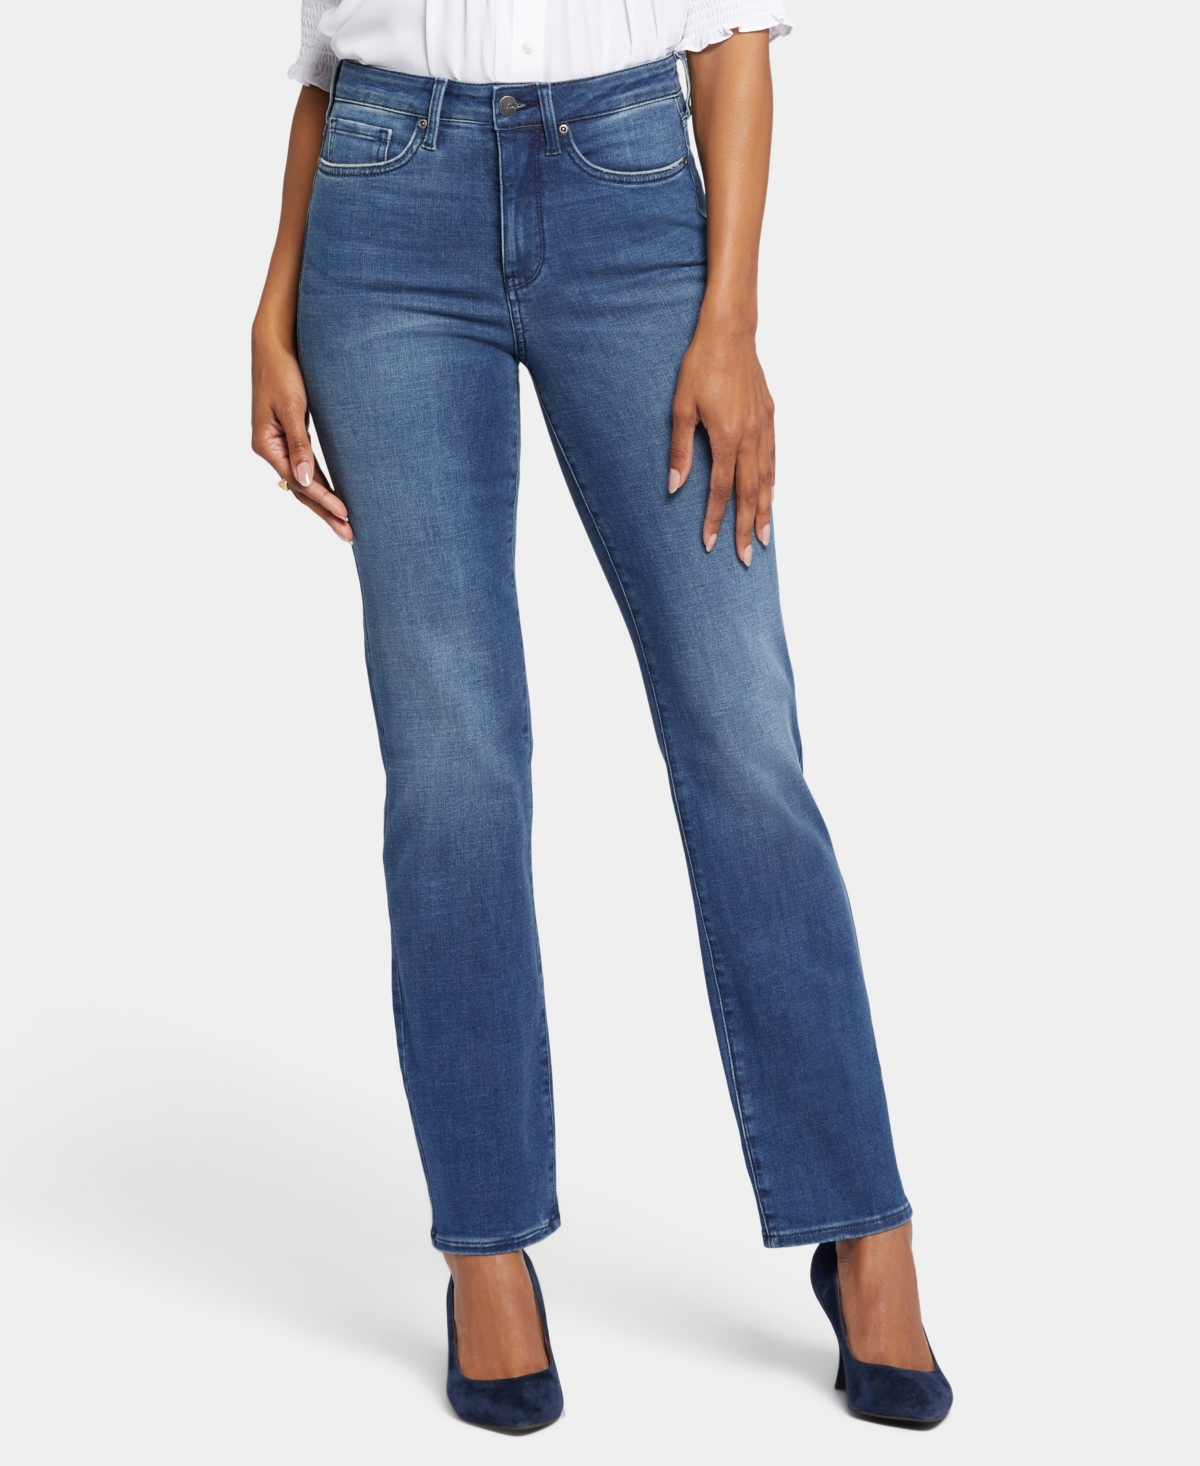 Nydj's Relaxed Straight Jeans - Bluewell